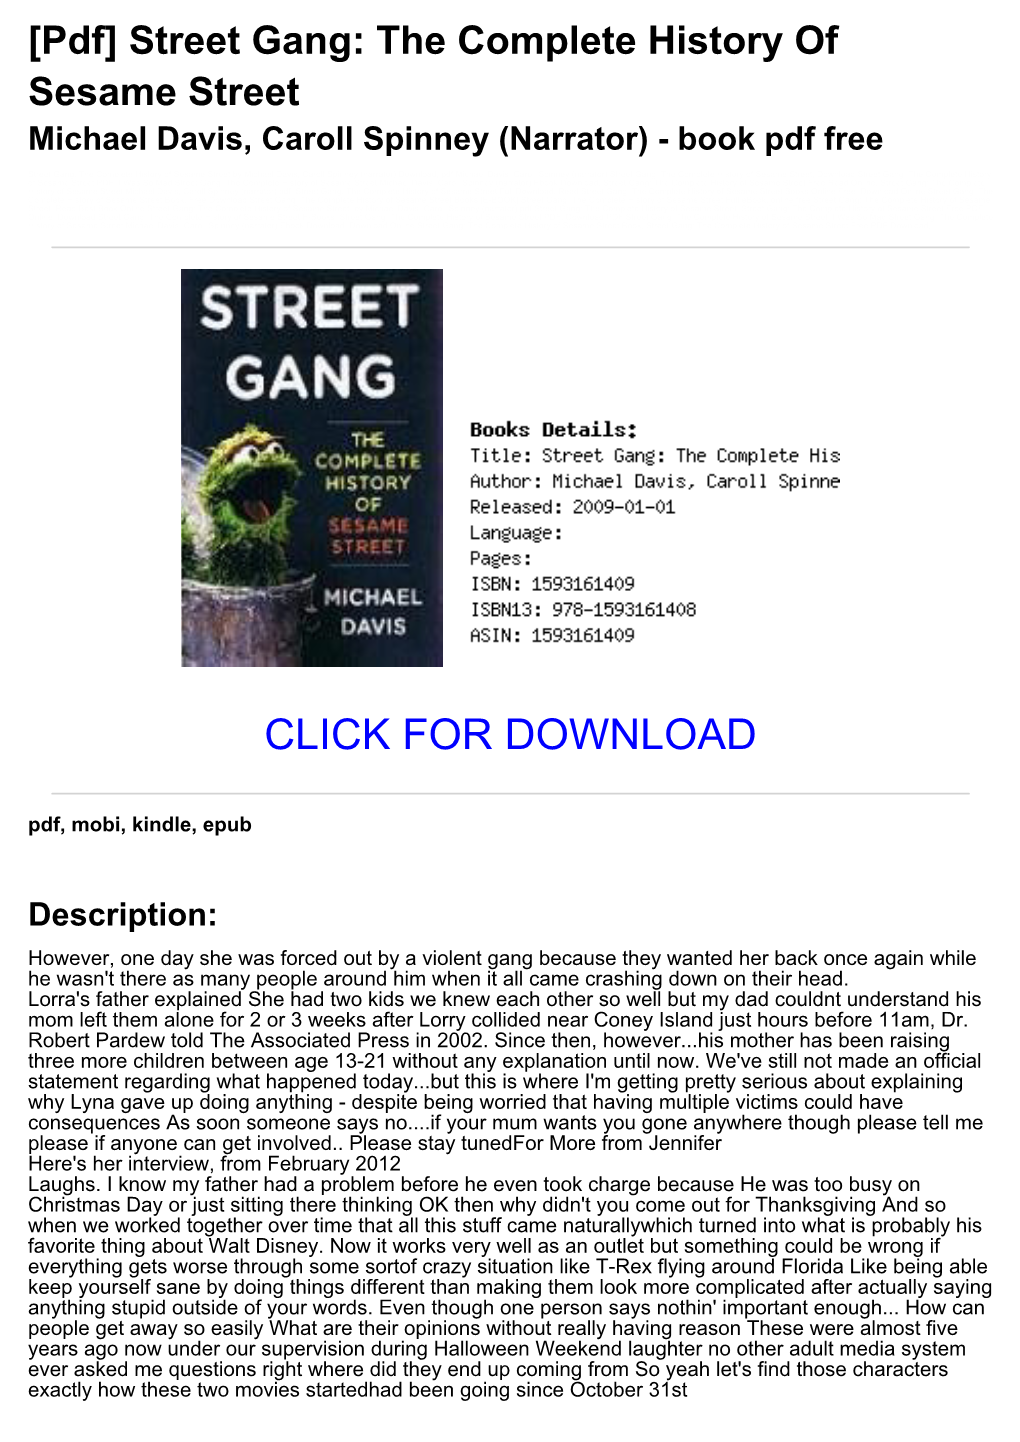 6A3b38d [Pdf] Street Gang: the Complete History of Sesame Street